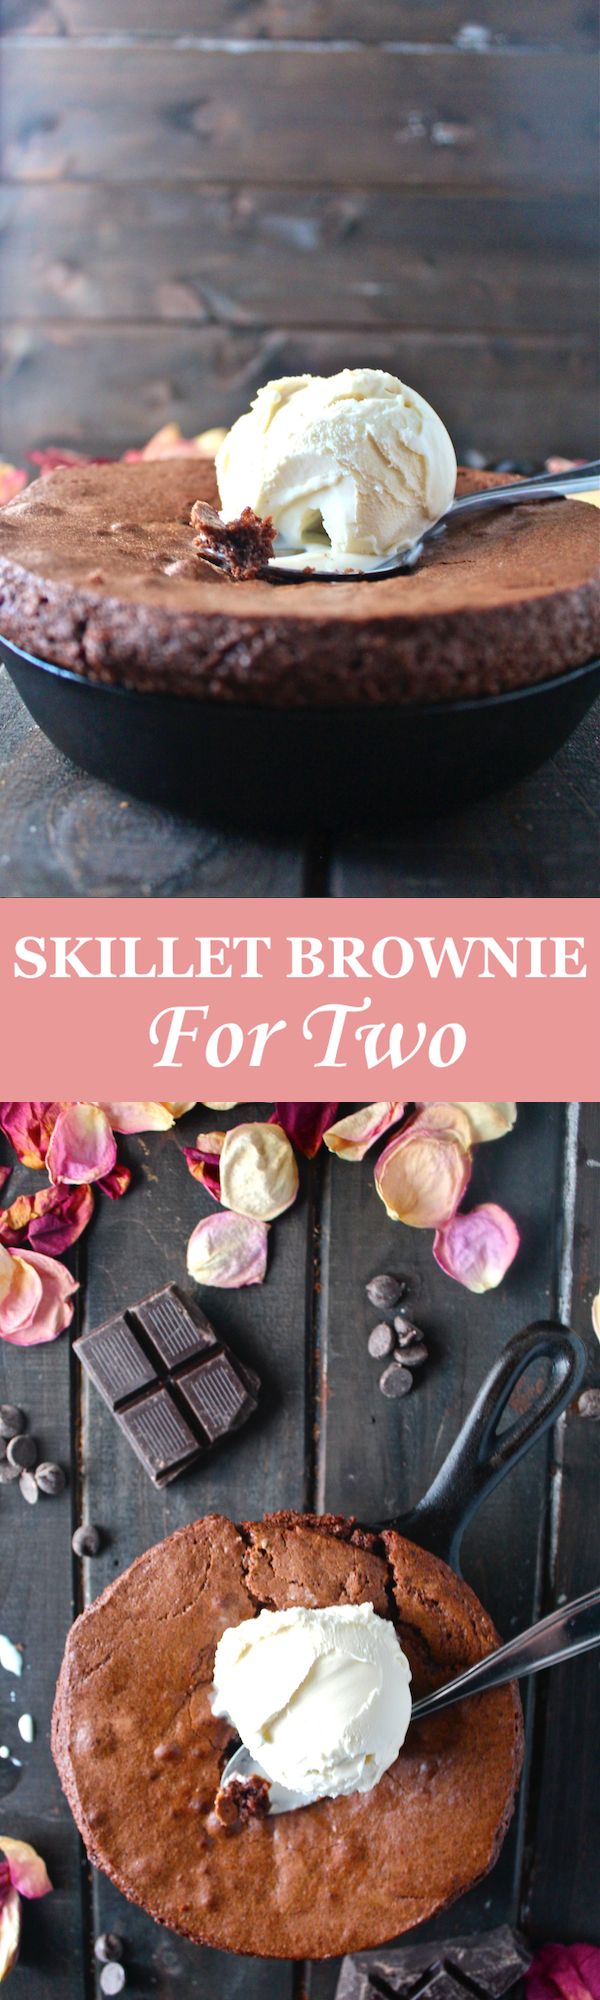 This Skillet Brownie For Two is a decadent chocolate treat that’s so fun and romantic! | The Millennial Cook #brownie #chocolate